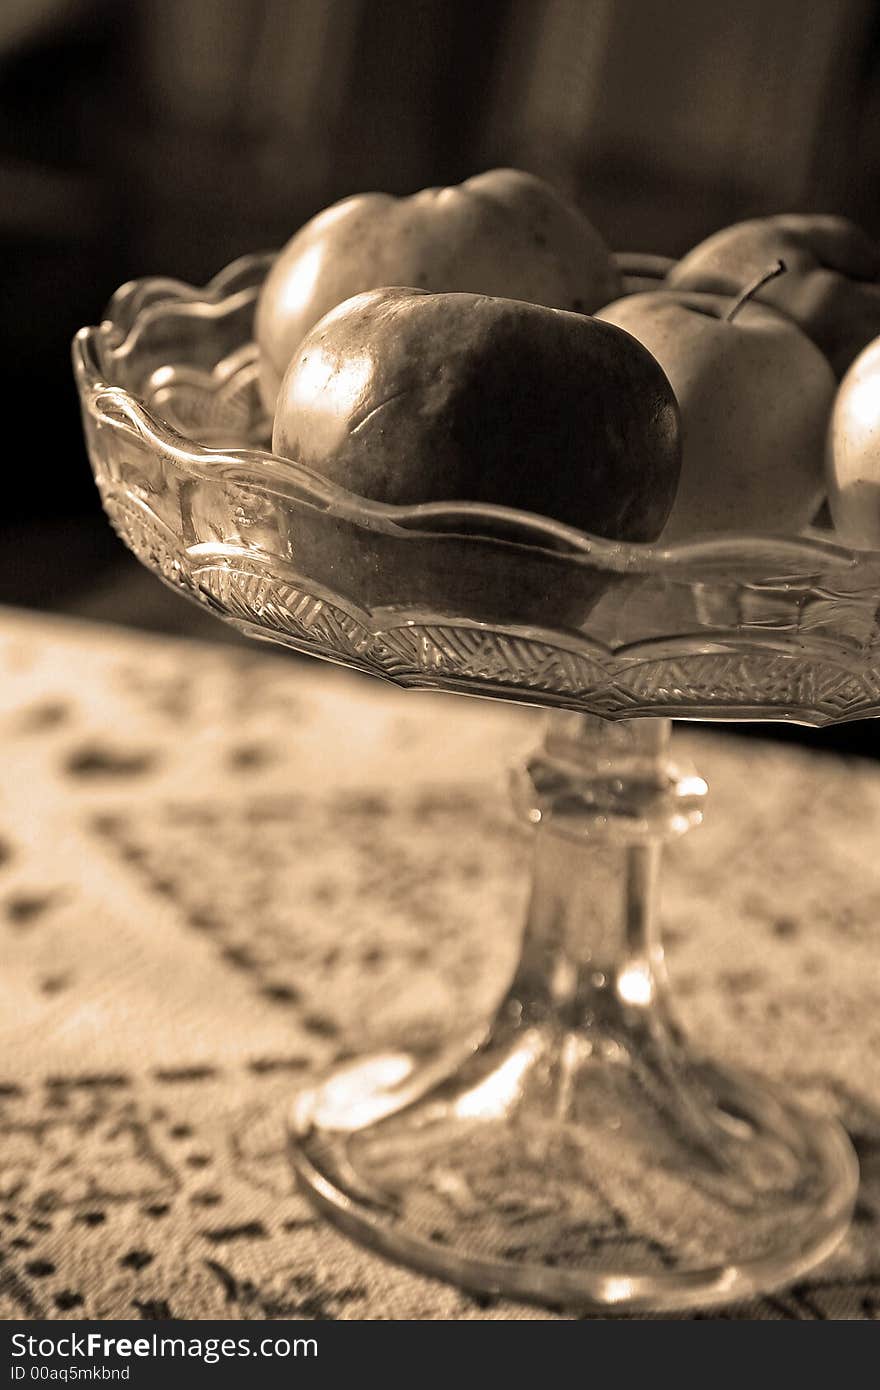 Some apples in sepia colors in a glass bowl